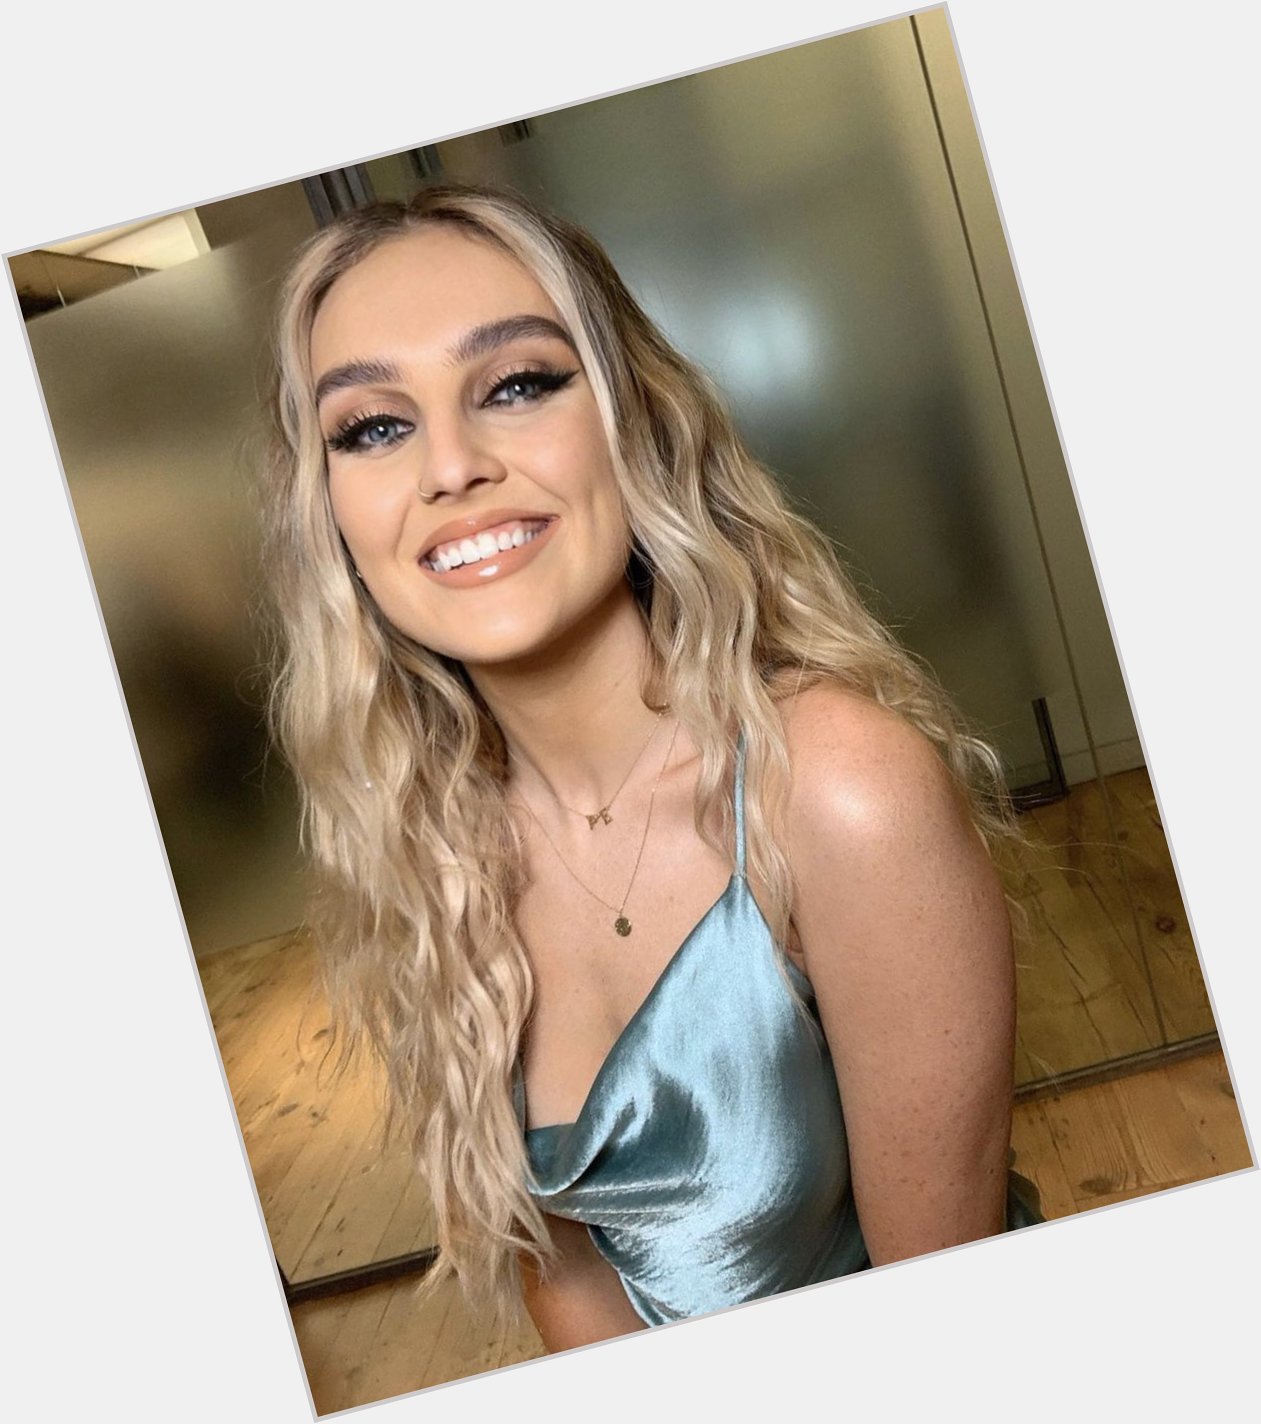 A little late but happy birthday to miss perrie edwards <3 sunshine in human form 